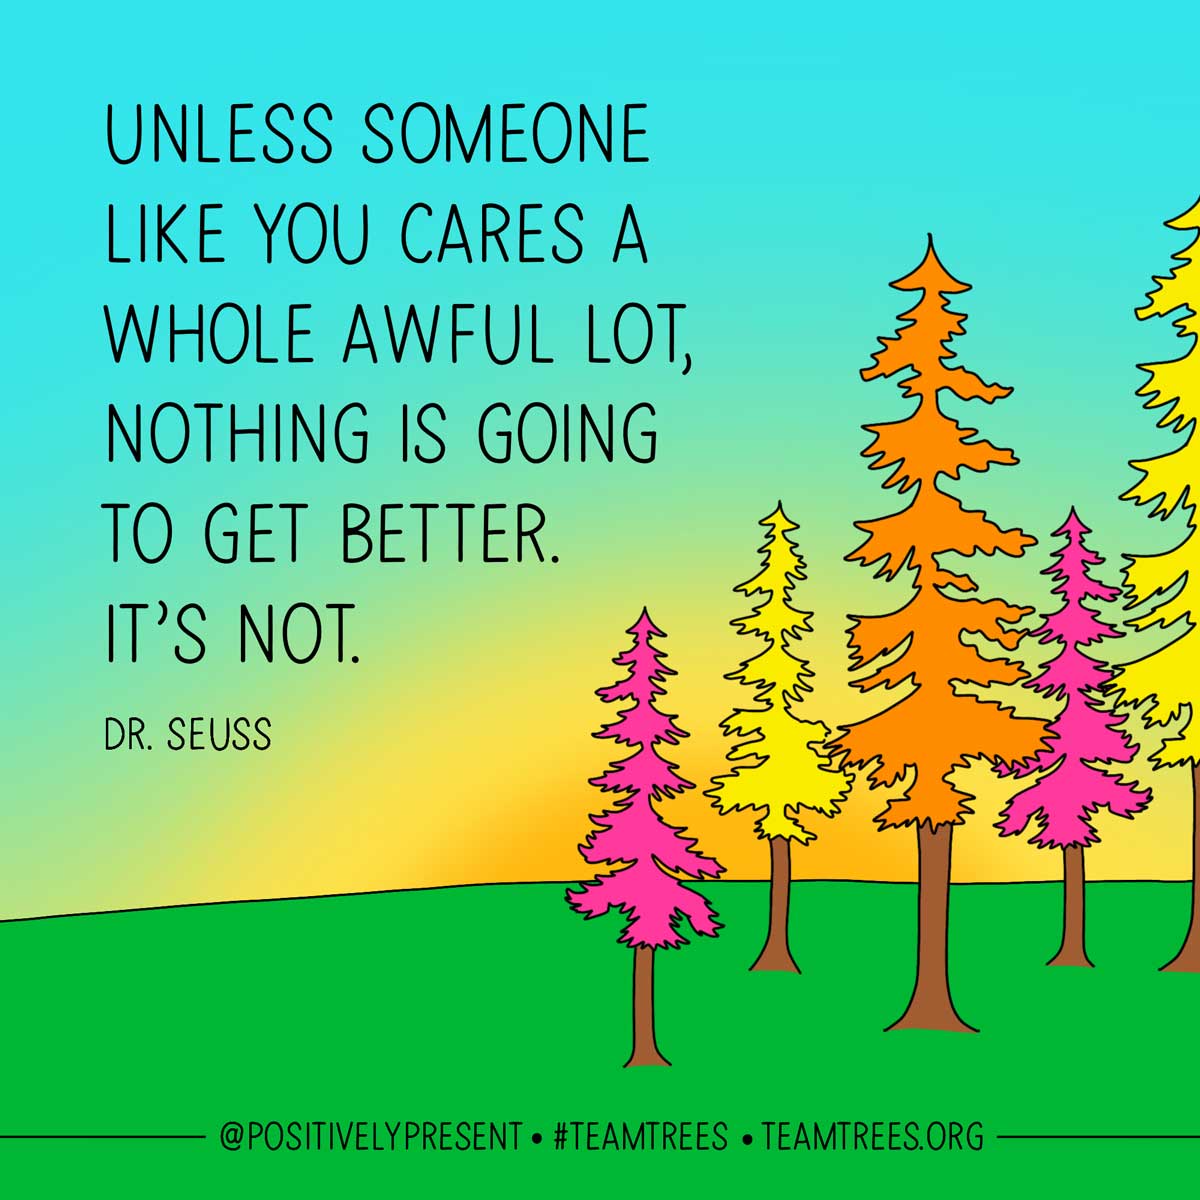 bright colored trees with aqua sky has dr seuss quote, unless you care a whole lot nothing will get better its not.